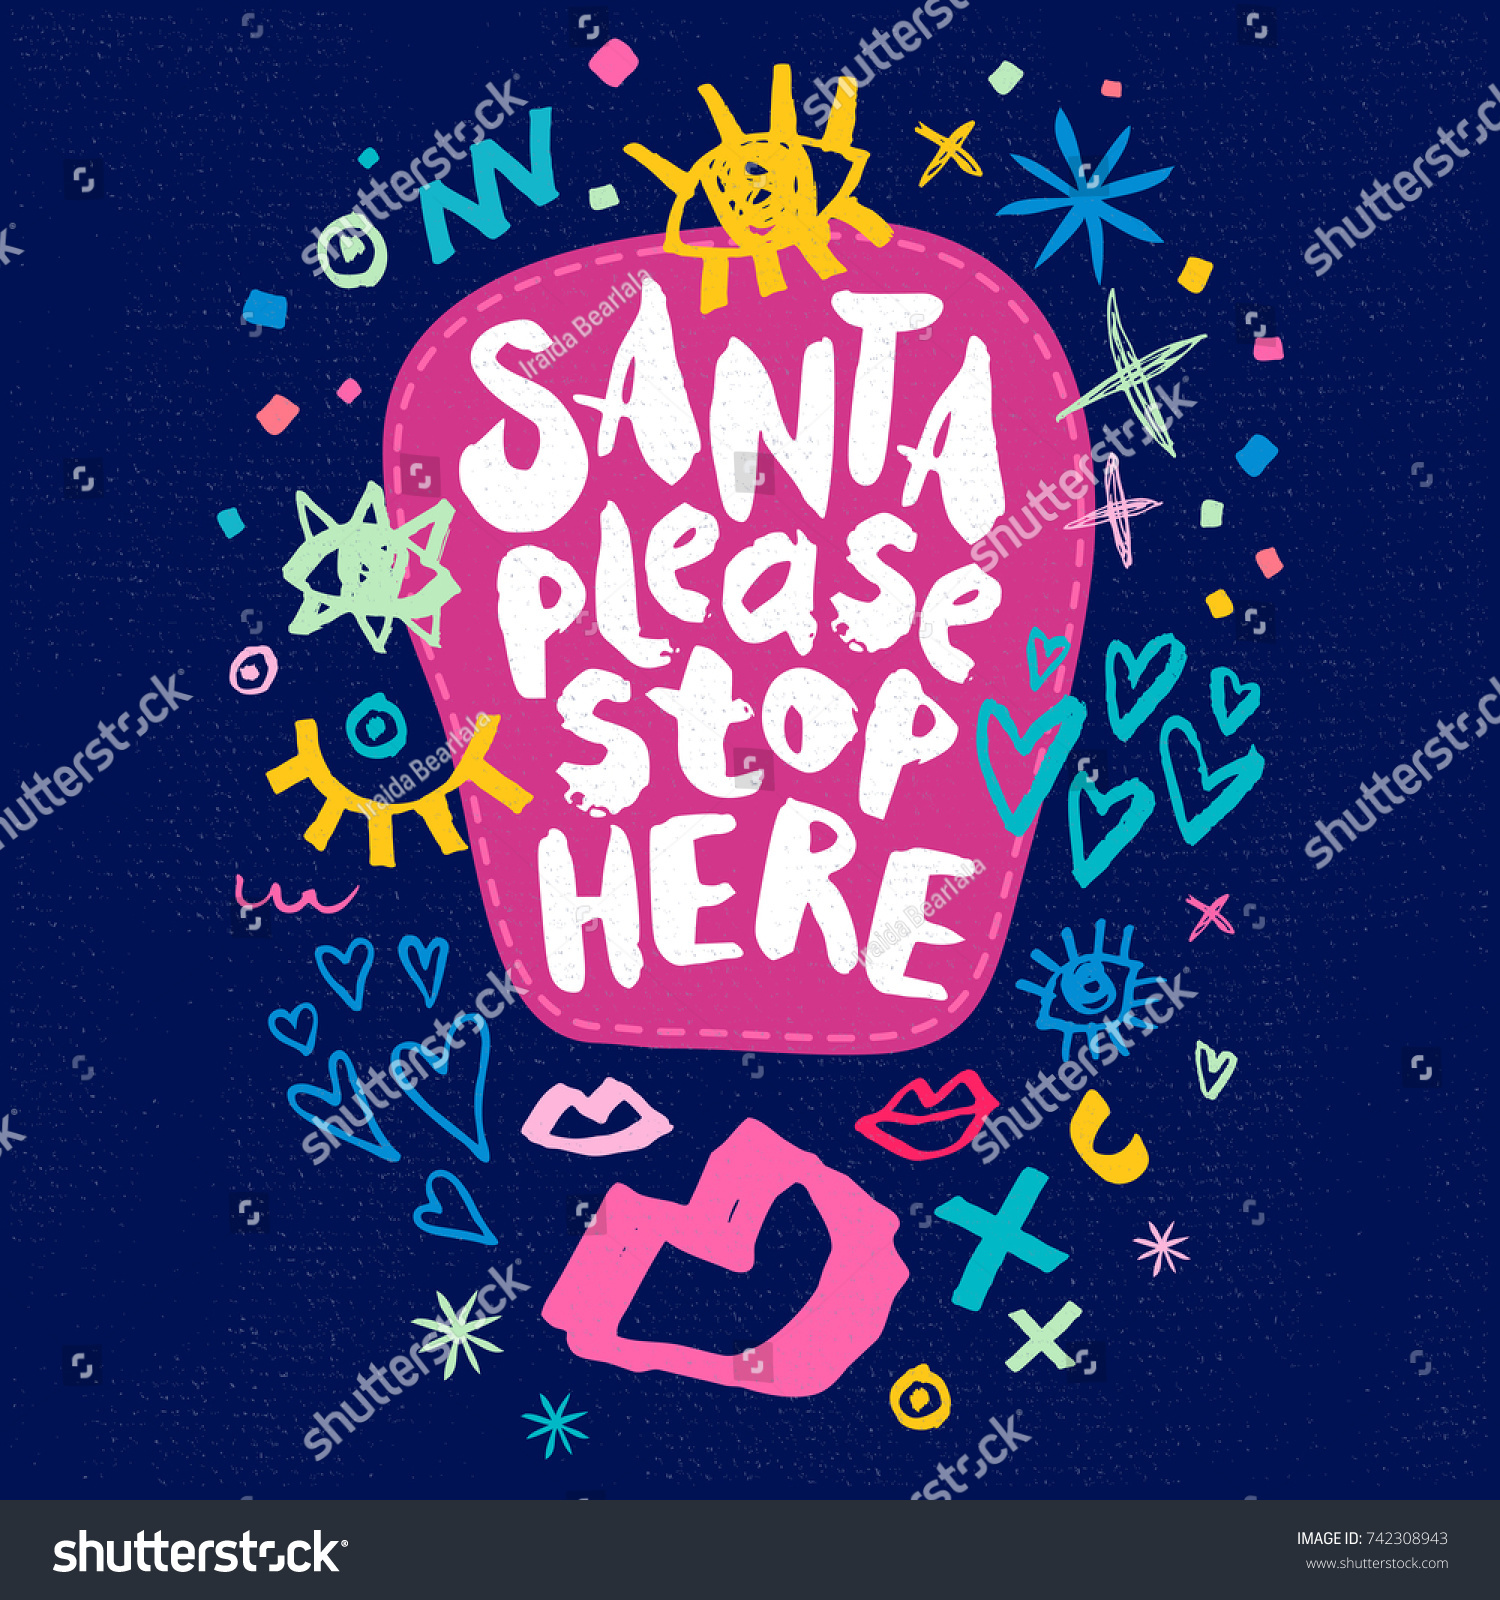 Santa Please Stop Here sketch style. Christmas lettering greeting cards. Multicolor doodles hearts stars eyes lips trendy firecracker fireworks. Hand drawn vector illustration. #742308943